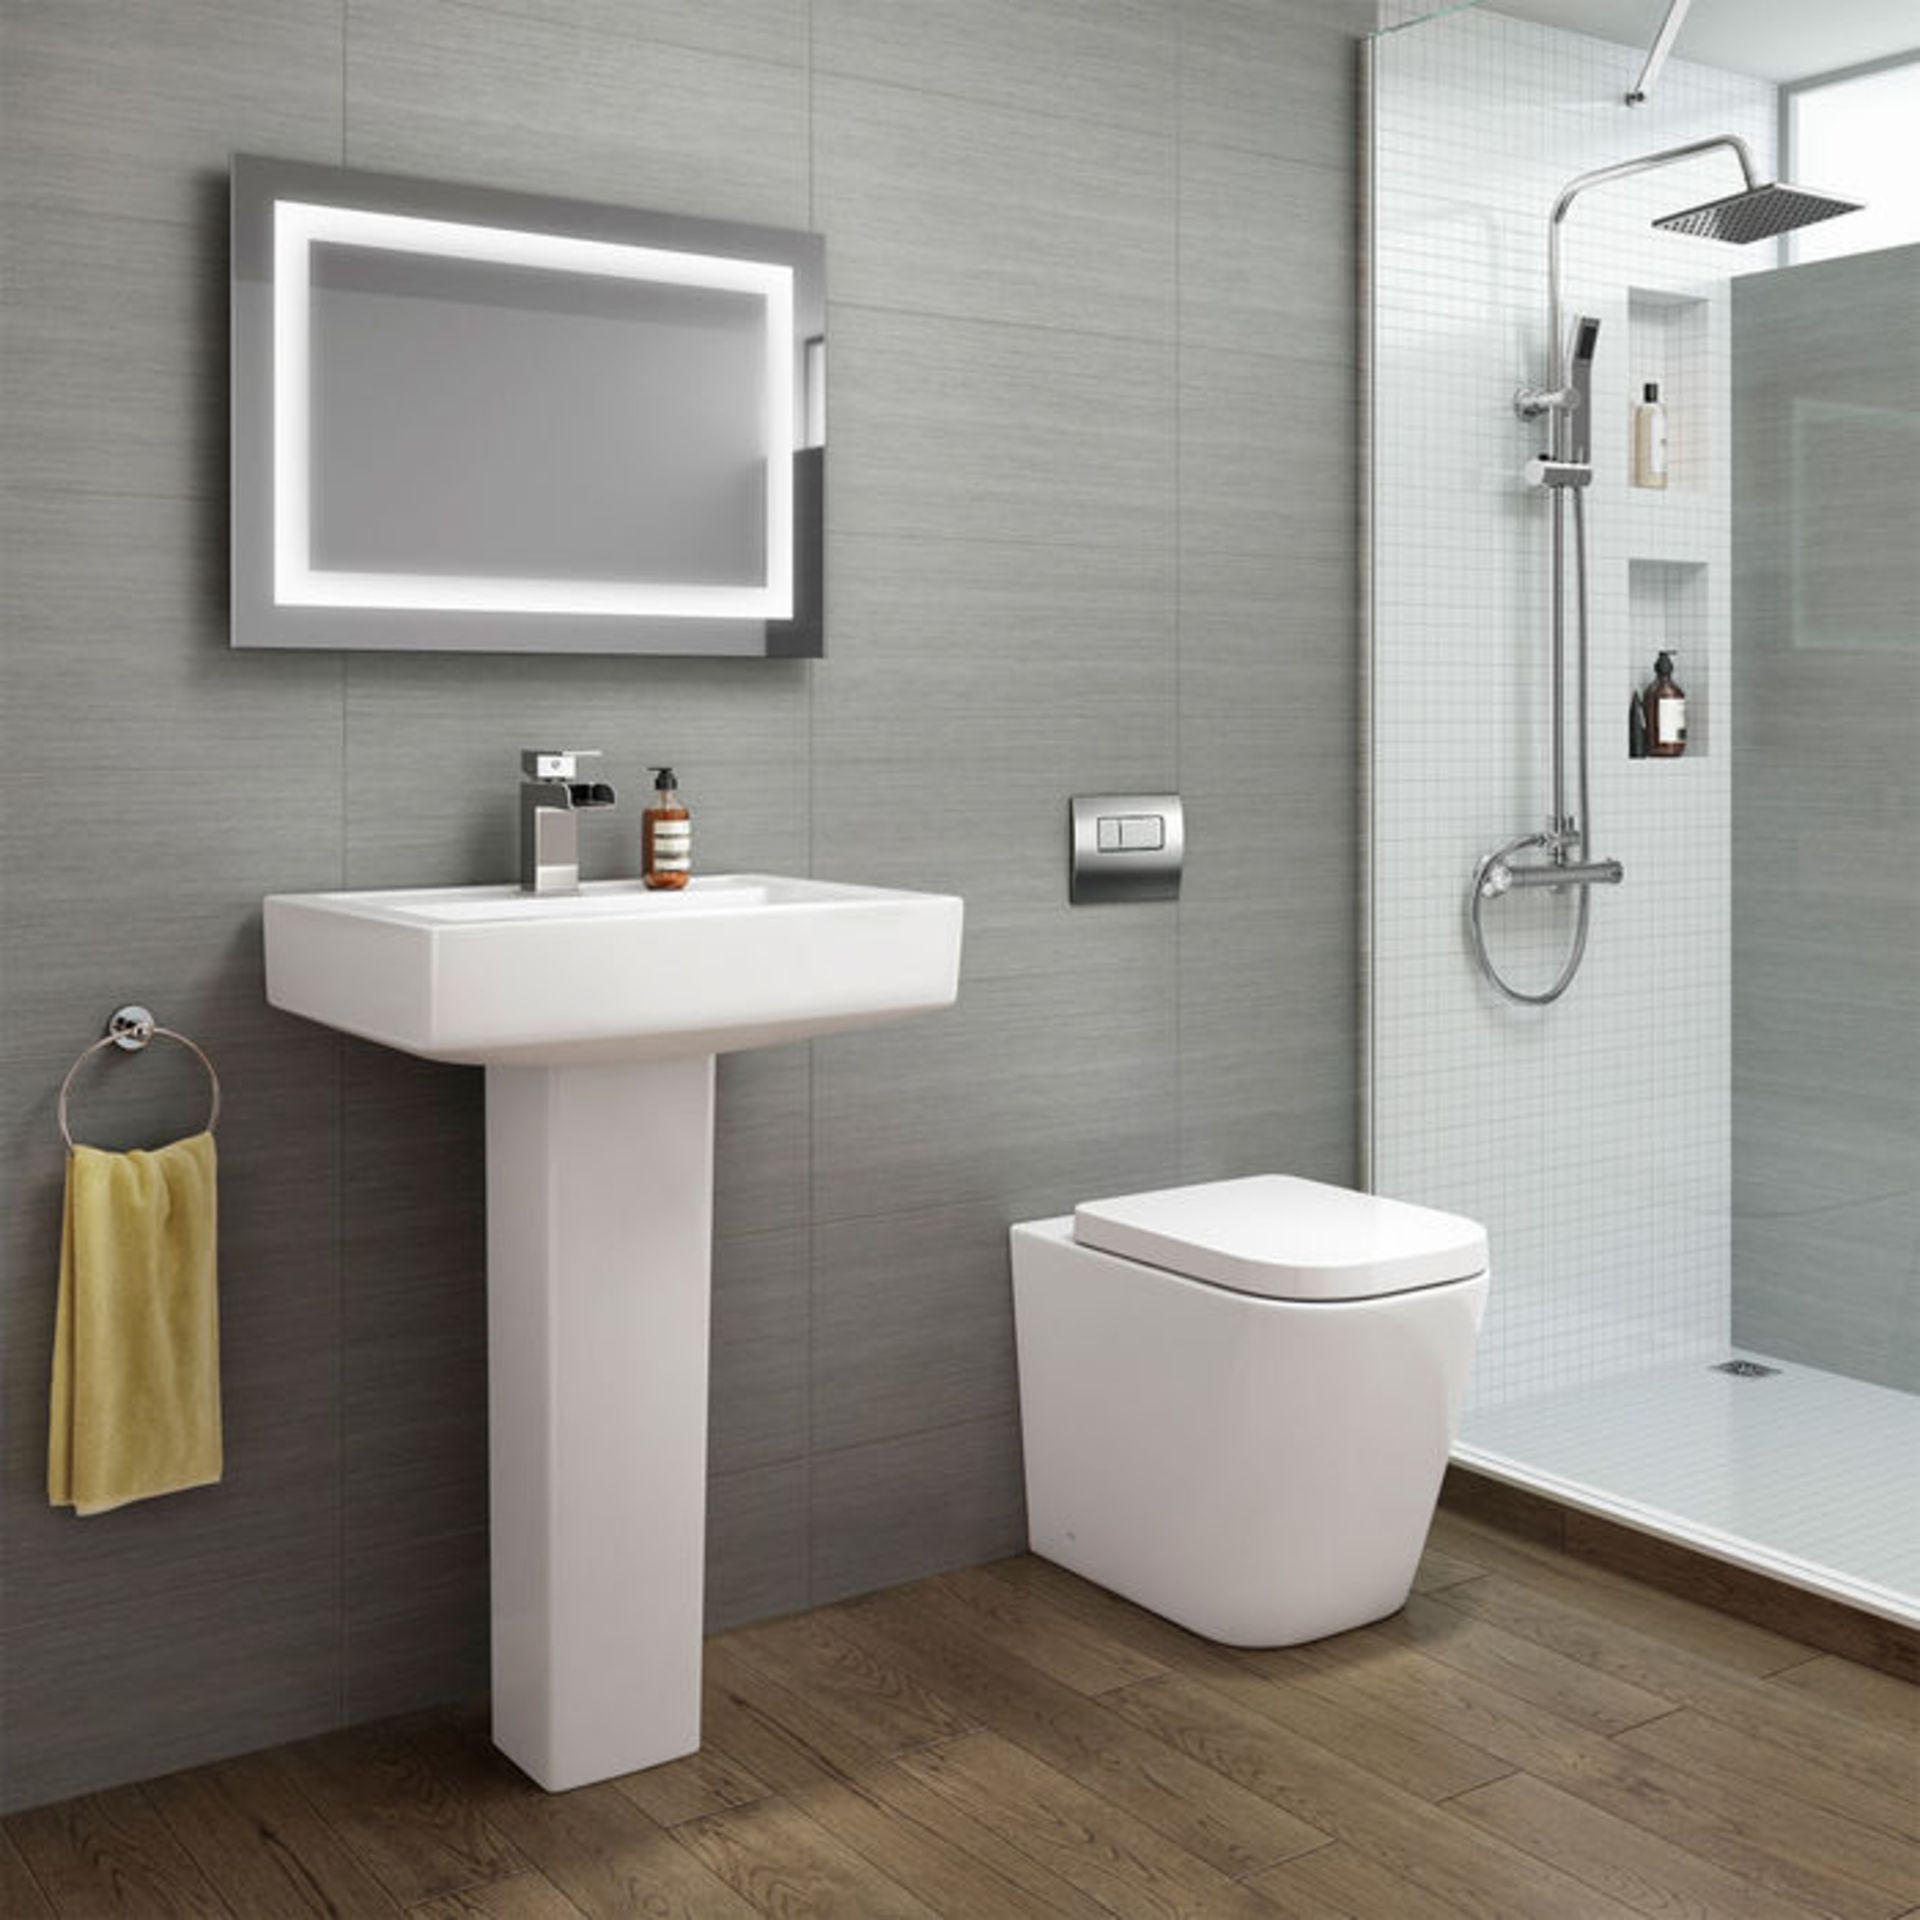 New Florence Rimless Back To Wall Toilet Inc Luxury Soft Close Seat. Rimless Design Makes It Easy To - Image 2 of 2